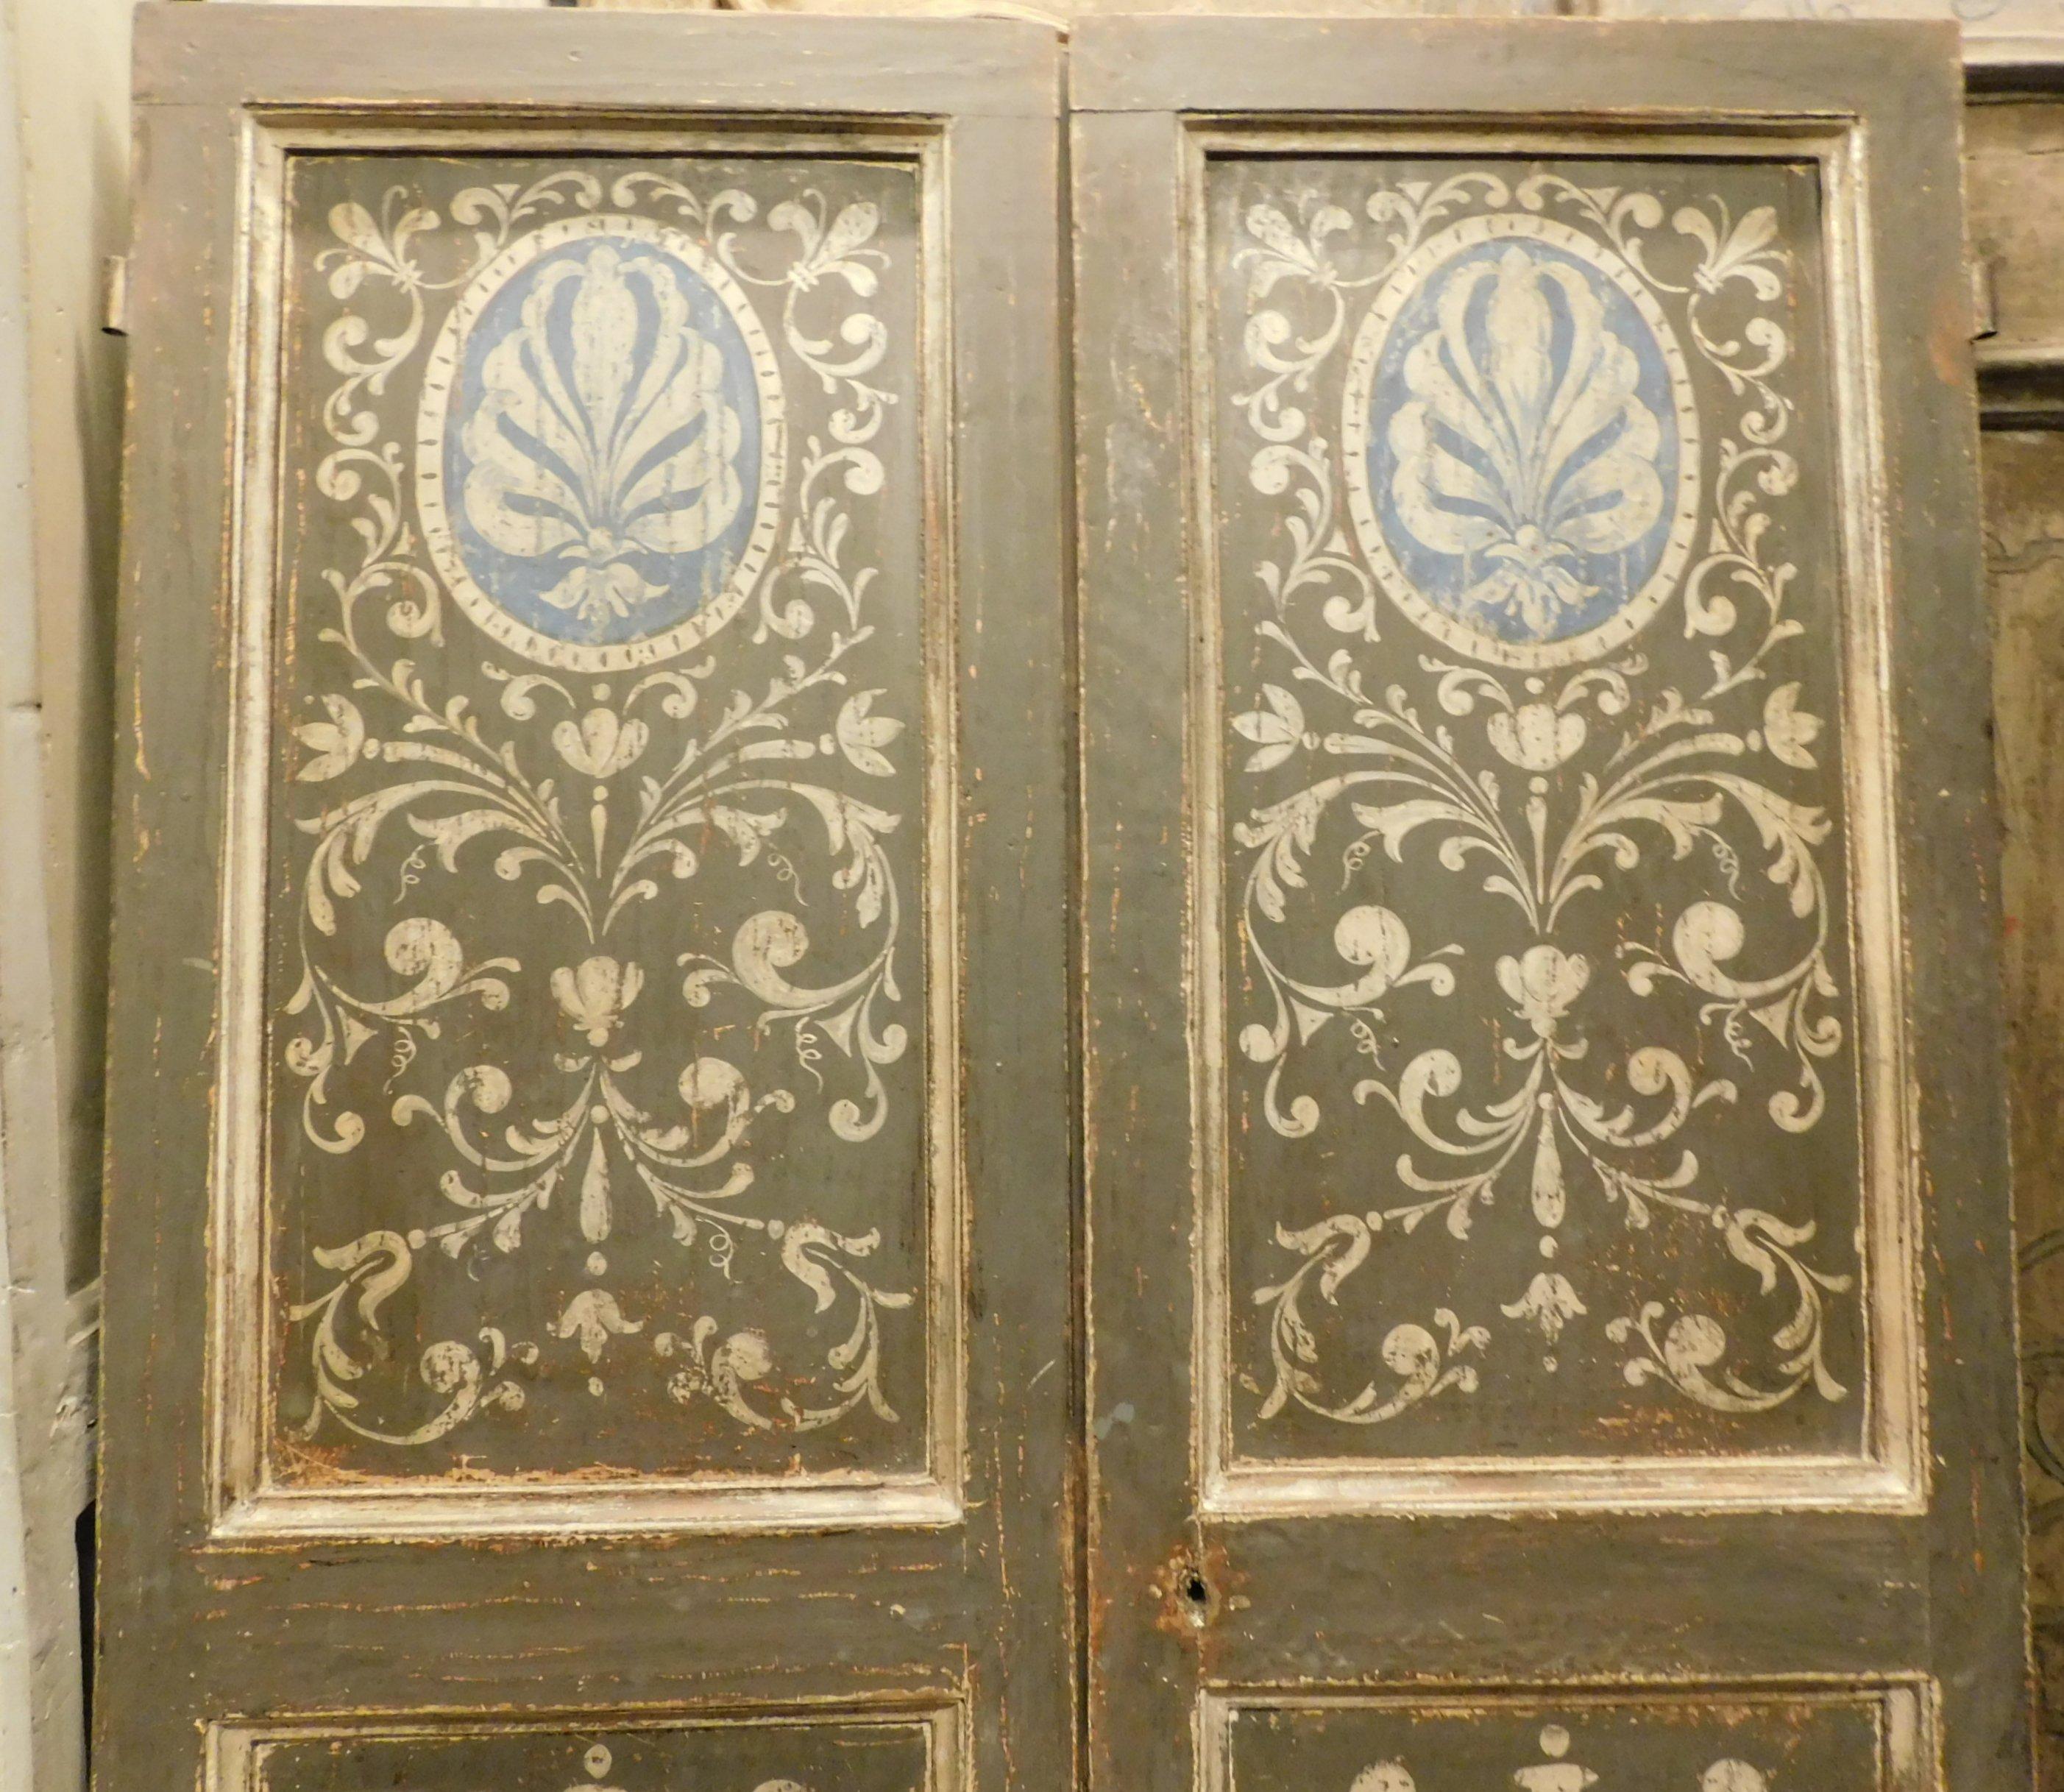 Hand-Painted Antique Painted Double Door, Grey and Blue Baroque Motifs, 18th Century, Italy For Sale